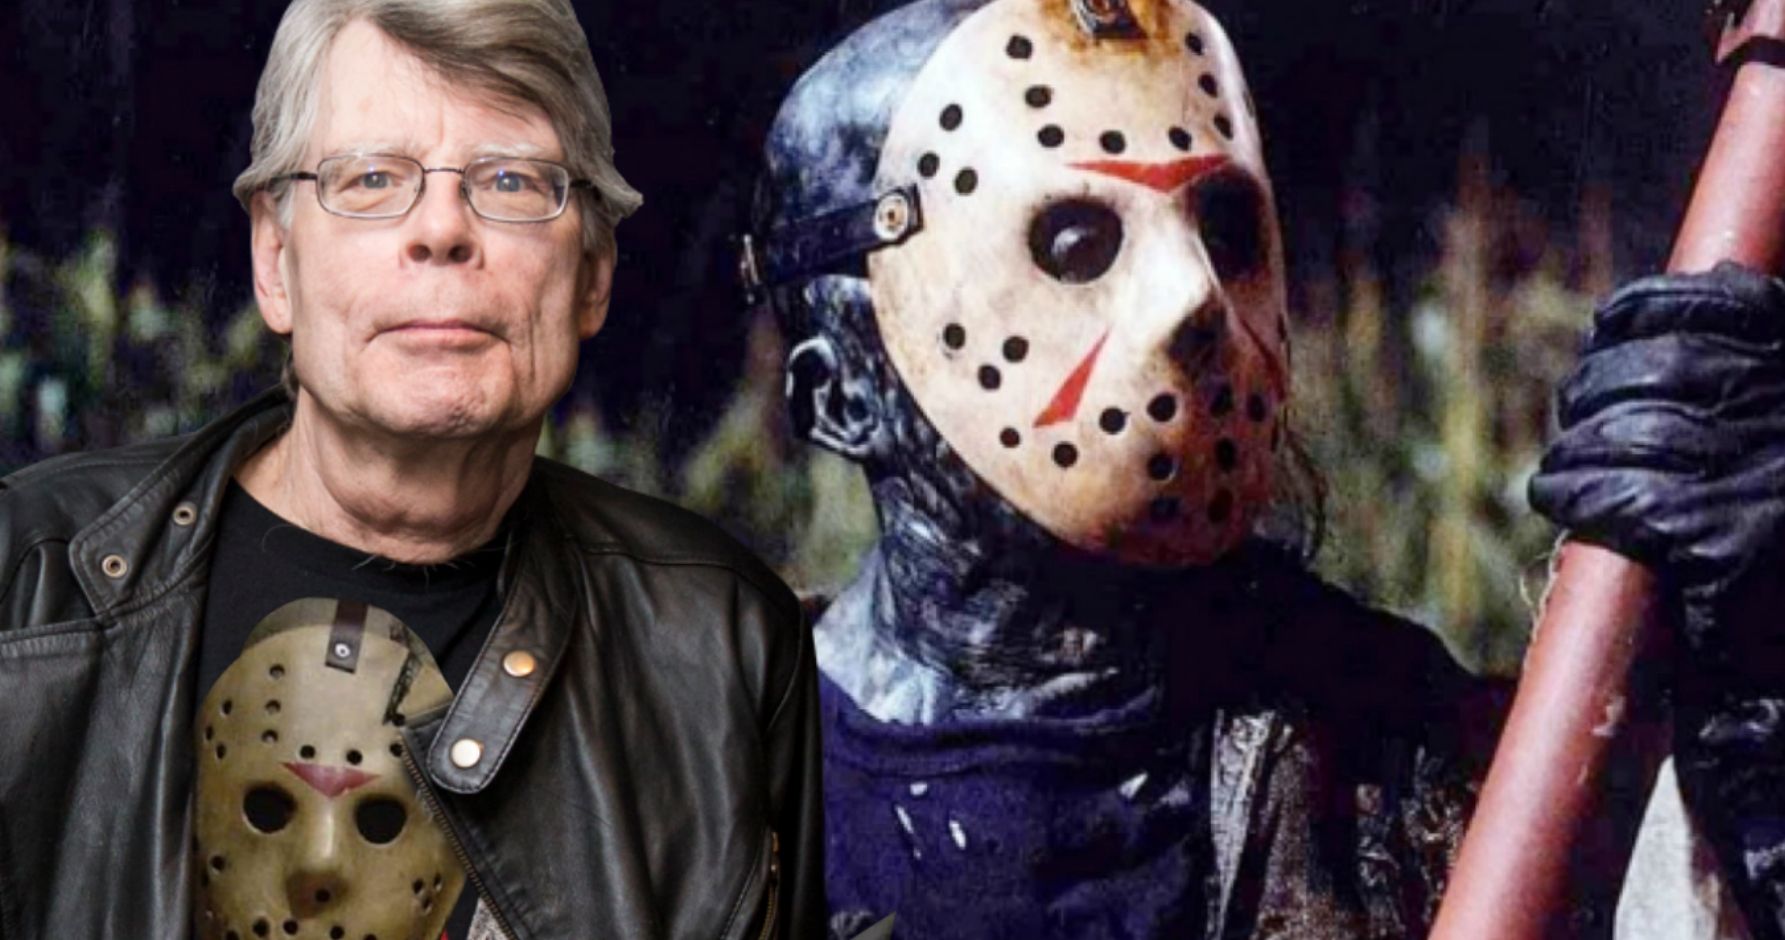 Stephen King Has a Friday the 13th Book He Wants to Write About Jason Voorhees